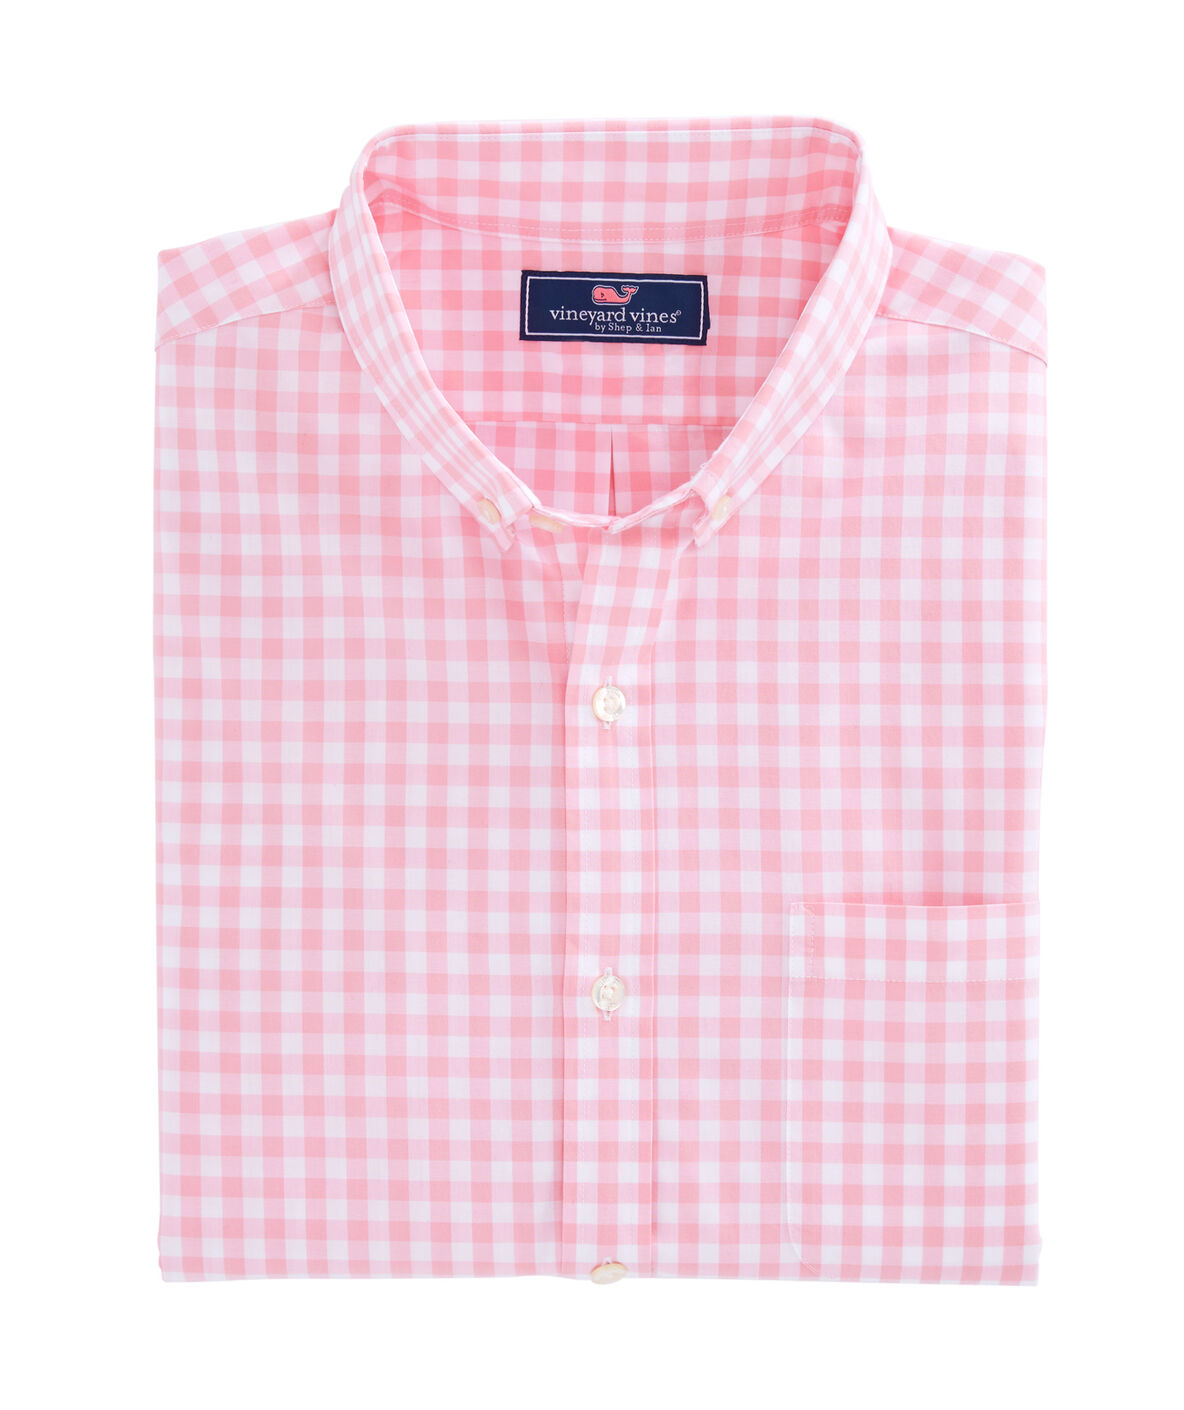 Description of Pink Gingham for screen readers